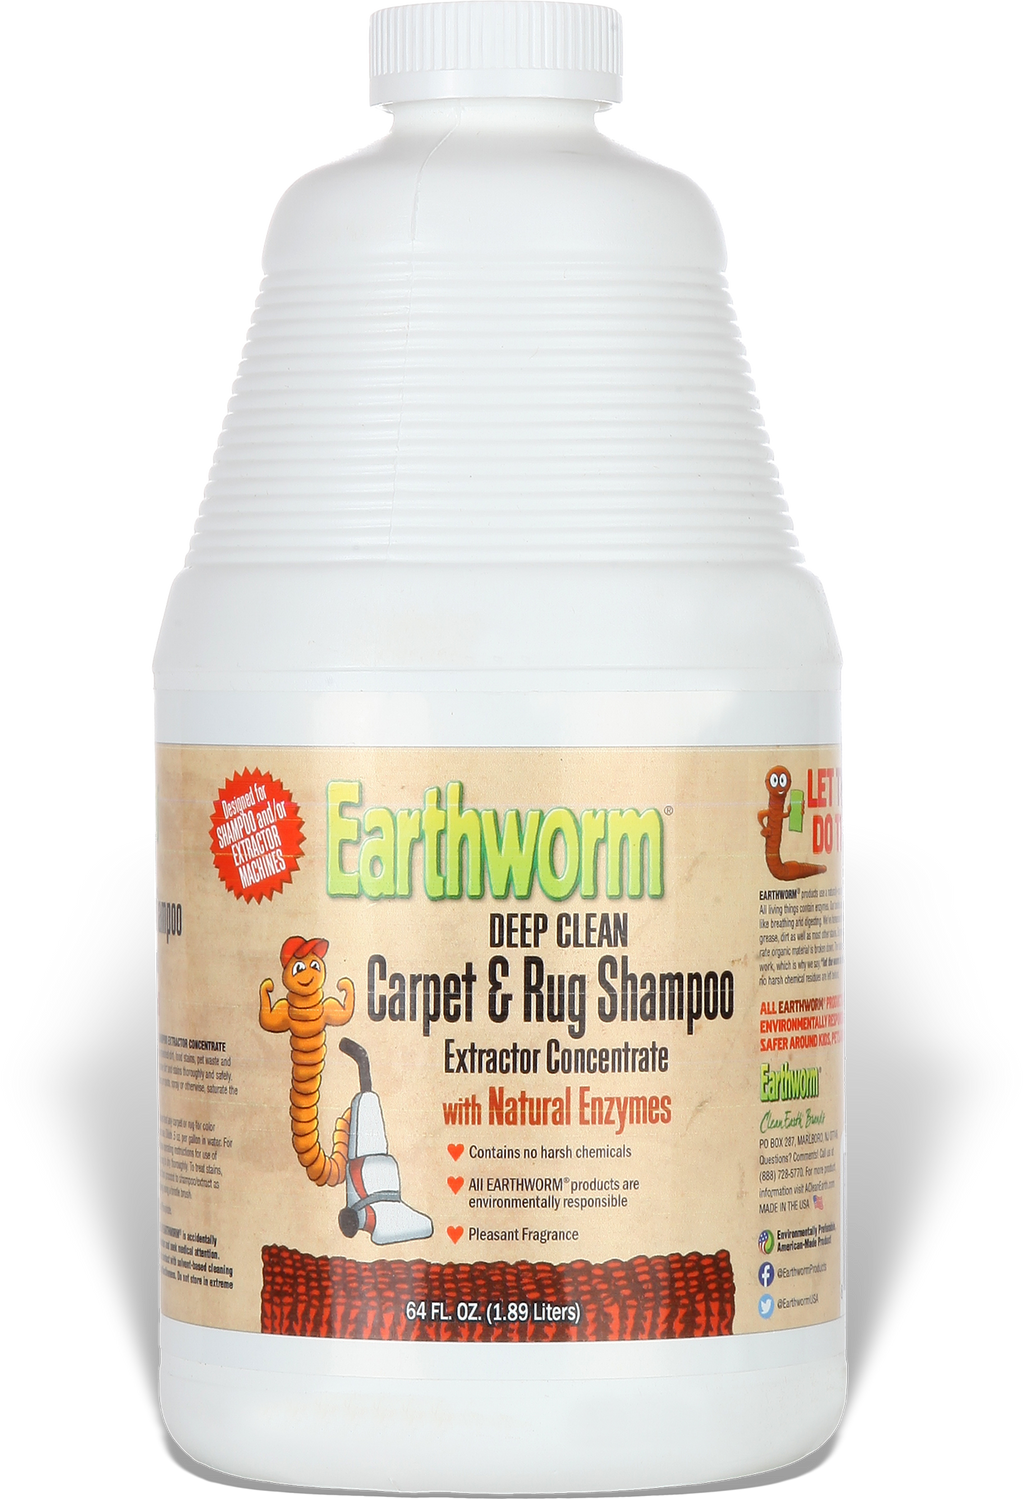 Earthworm® Deep Clean Carpet & Rug Shampoo Extractor Concentrate 64 oz